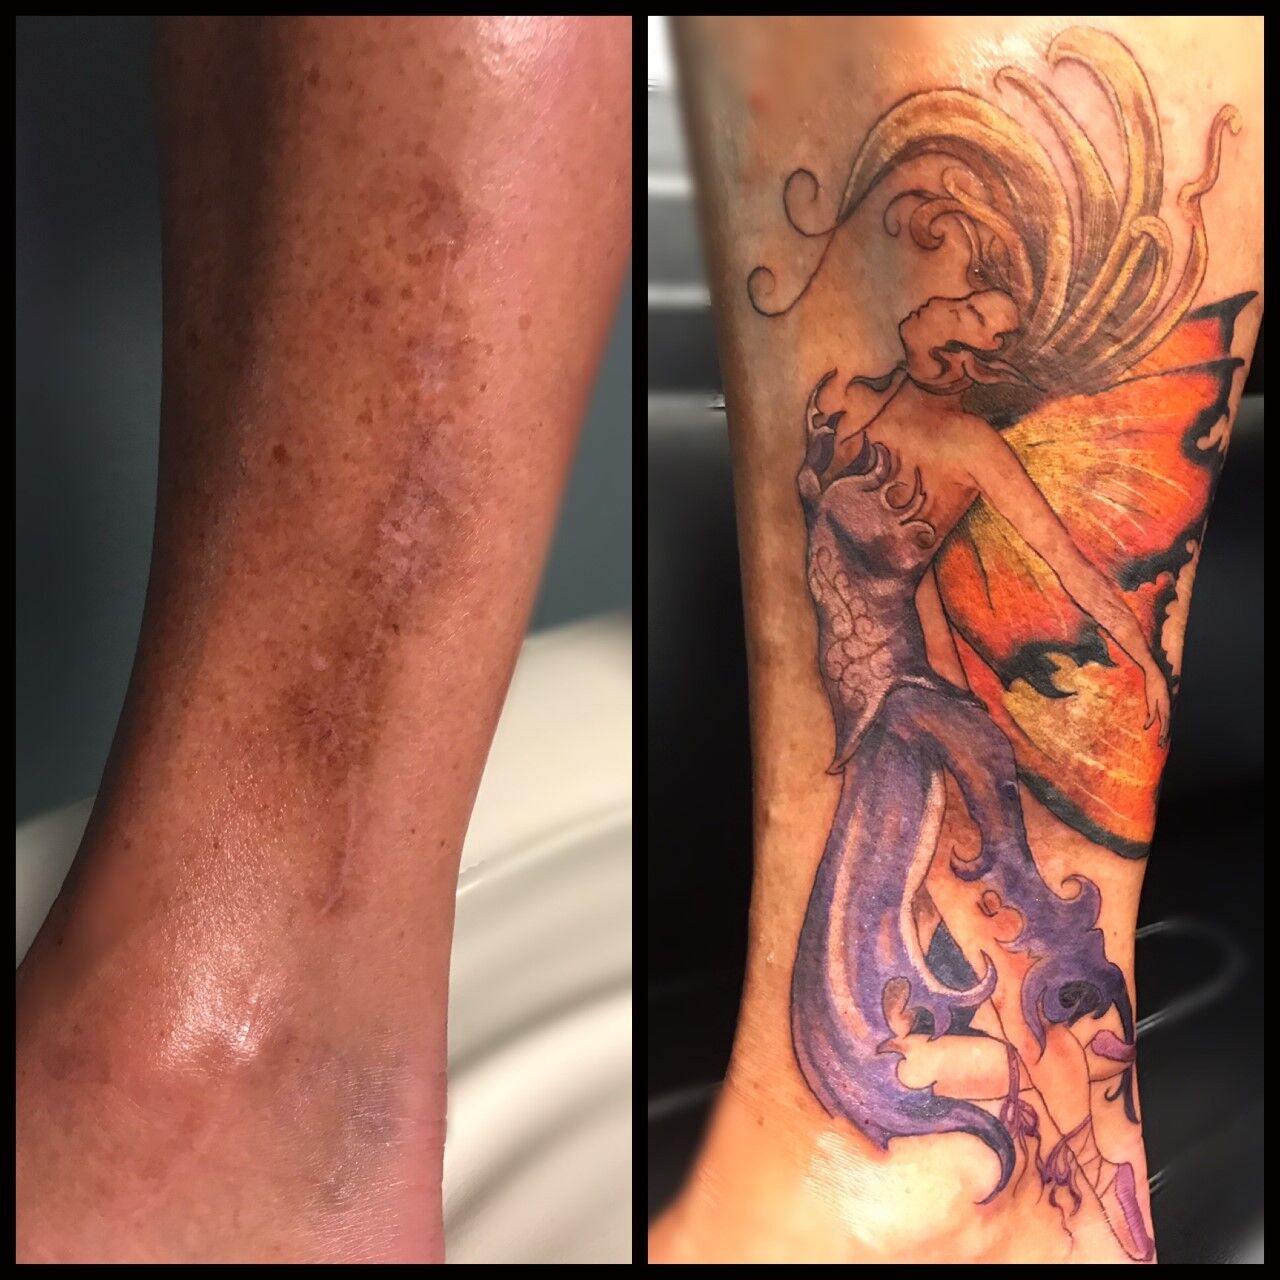 Tattoo Peeling: How to Care For Your Ink as It Peels - AuthorityTattoo